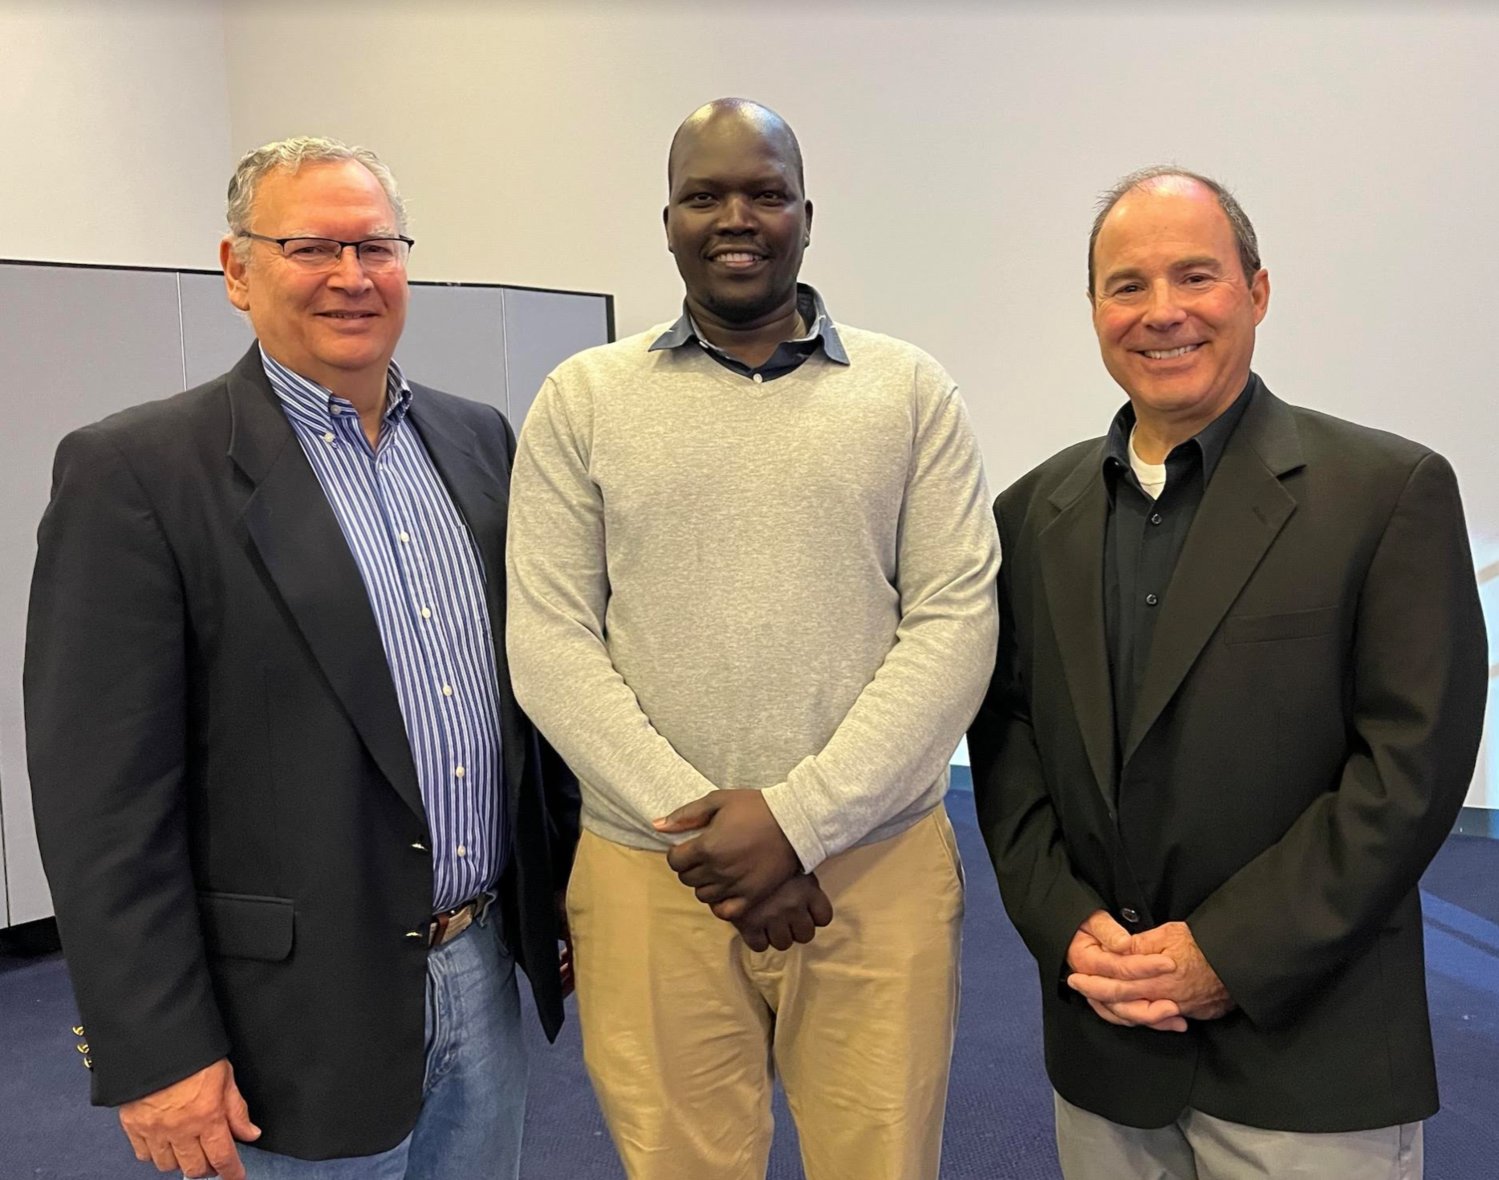 Associate Pastor Randy Phillips, left, of the New Beginnings Community Church, opened the YMCA of the Greater Tri-Valley’s annual Prayer Breakfast with prayer. He is pictured with keynote speaker Garang Ajak, of InterFaith Works in Syracuse; and Hank Leo, CEO of the YMCA of the Greater Tri-Valley.